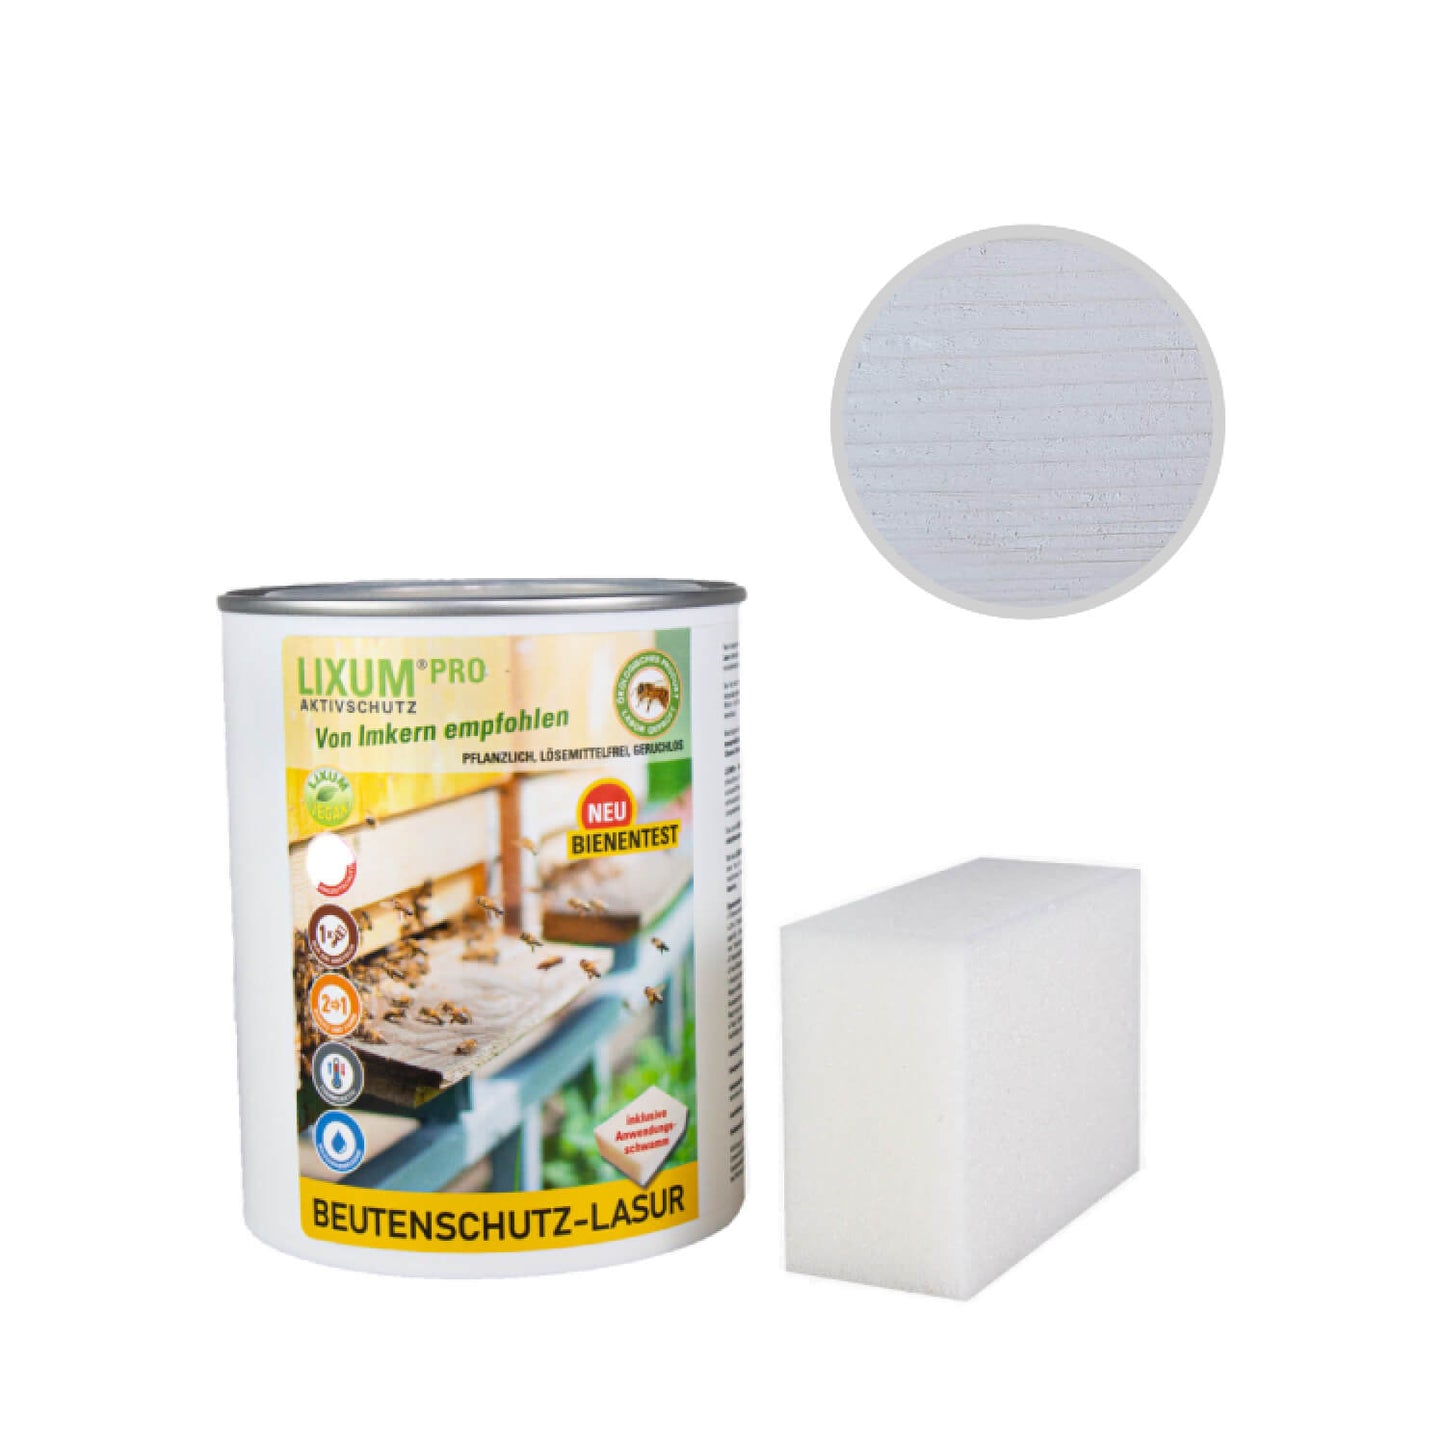 Biological & Natural Hive Protection Glaze for Beehive- Wood Protection & Wood Care